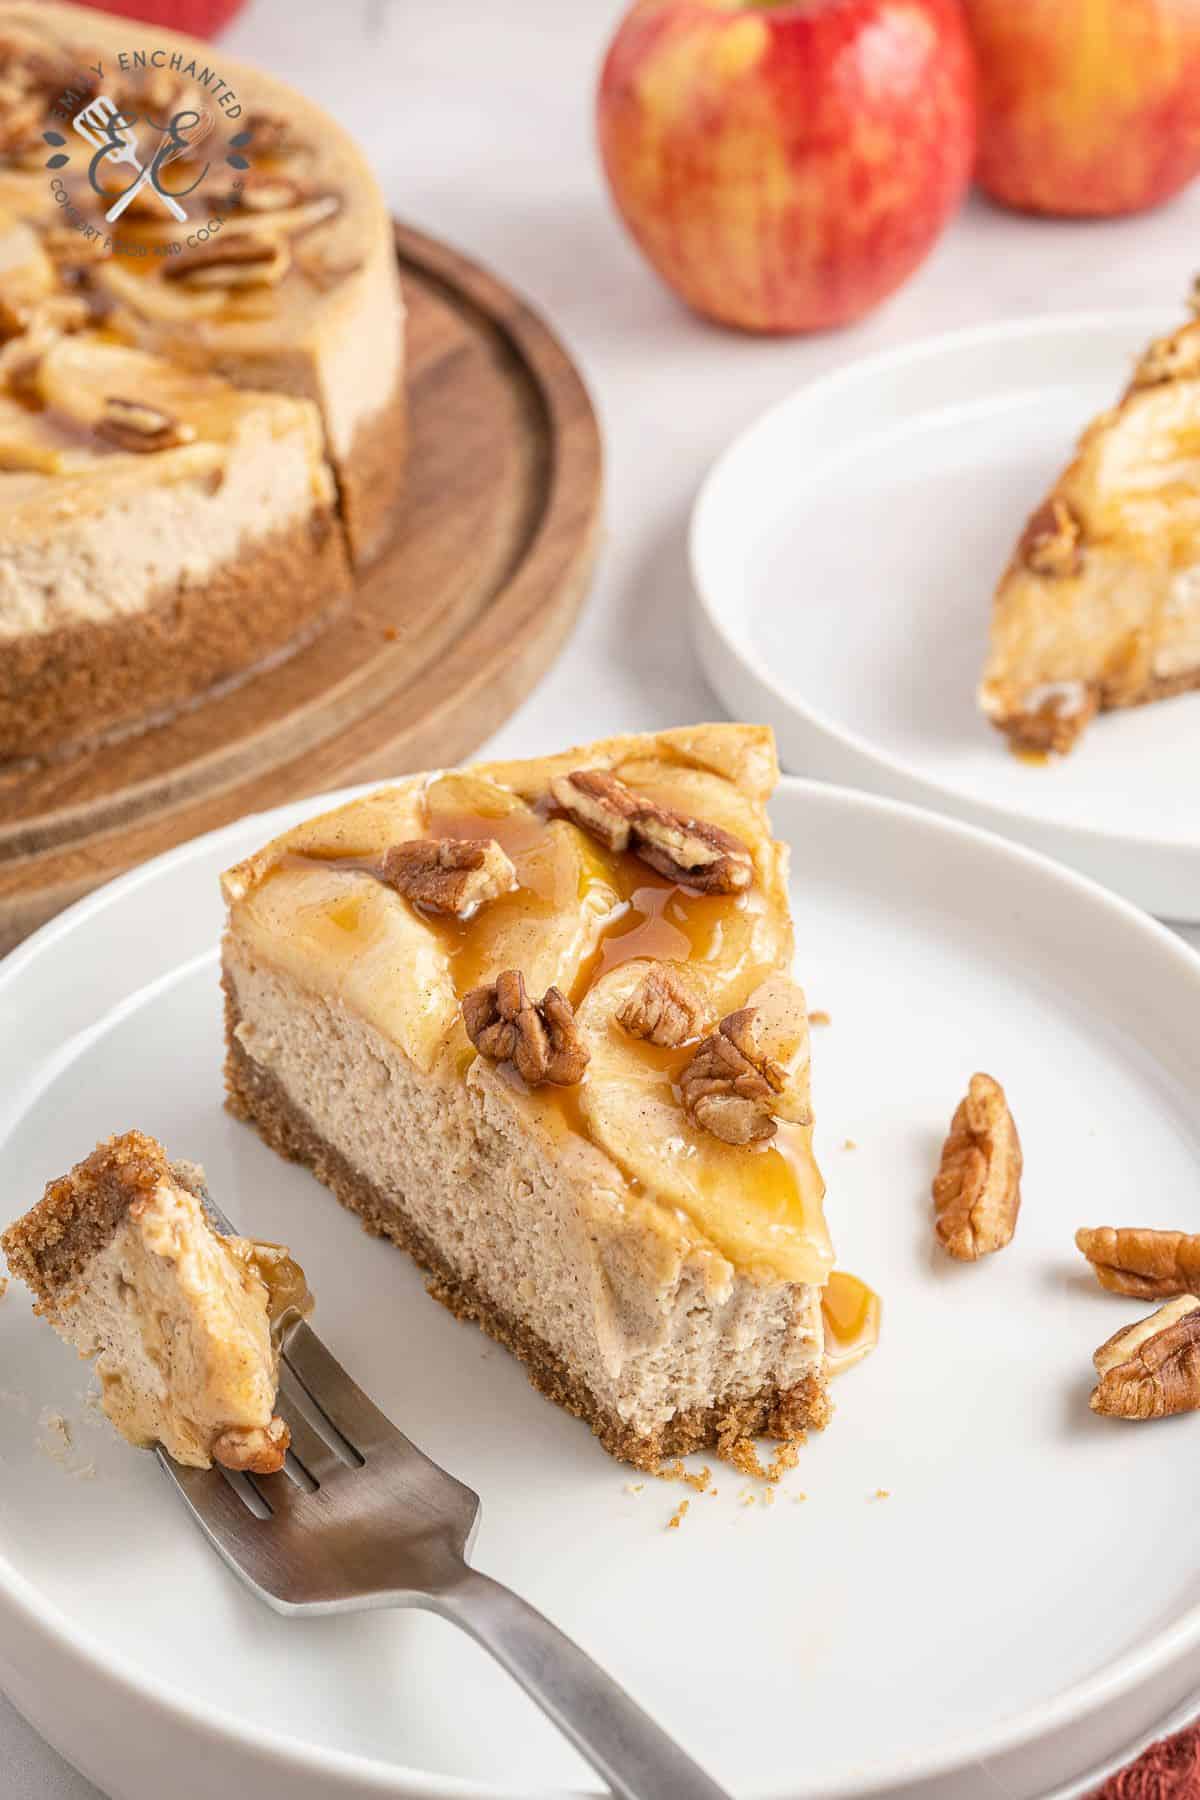 Caramel Apple Cheesecake slice with a bite taken out of it